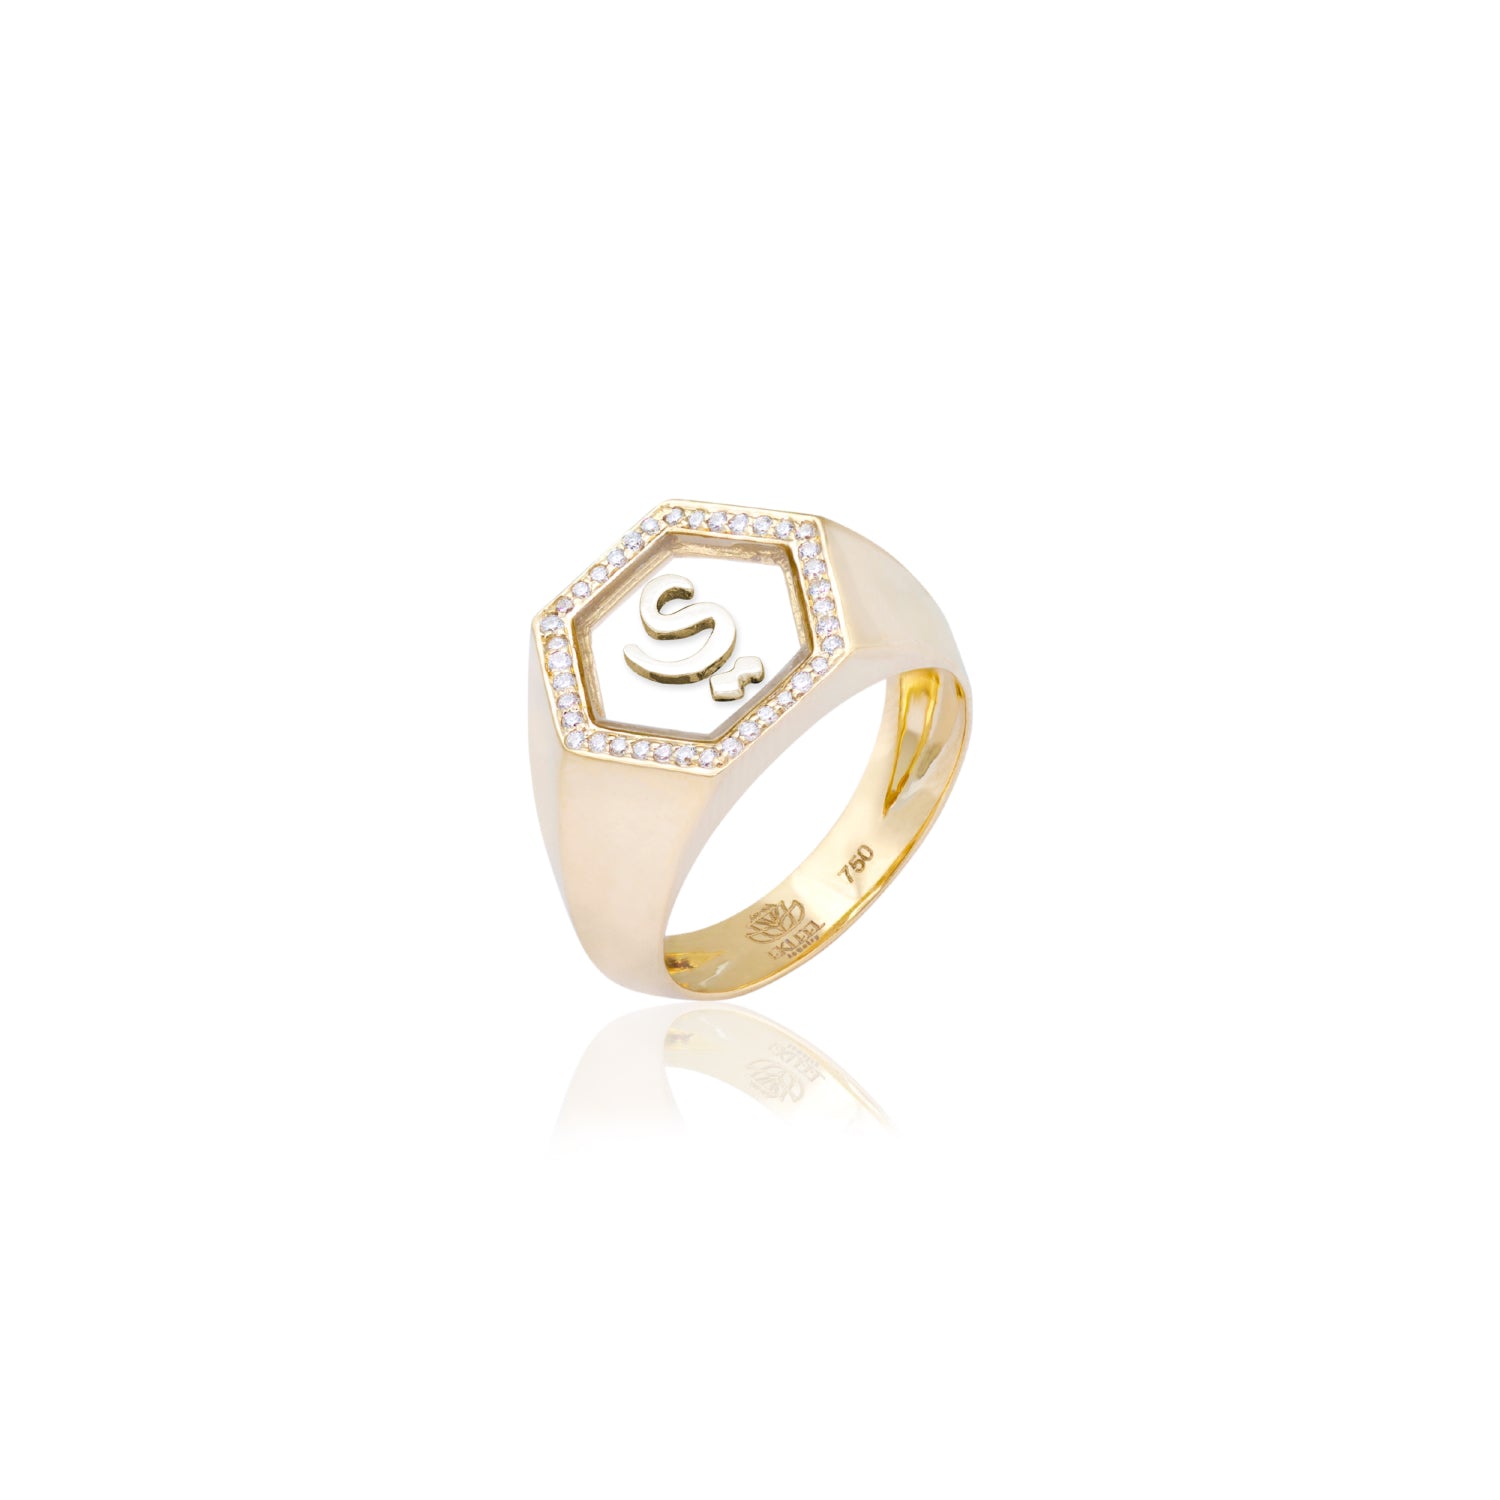 Qamoos 2.0 Letter ي Plexiglass and Diamond Signet Ring in Yellow Gold